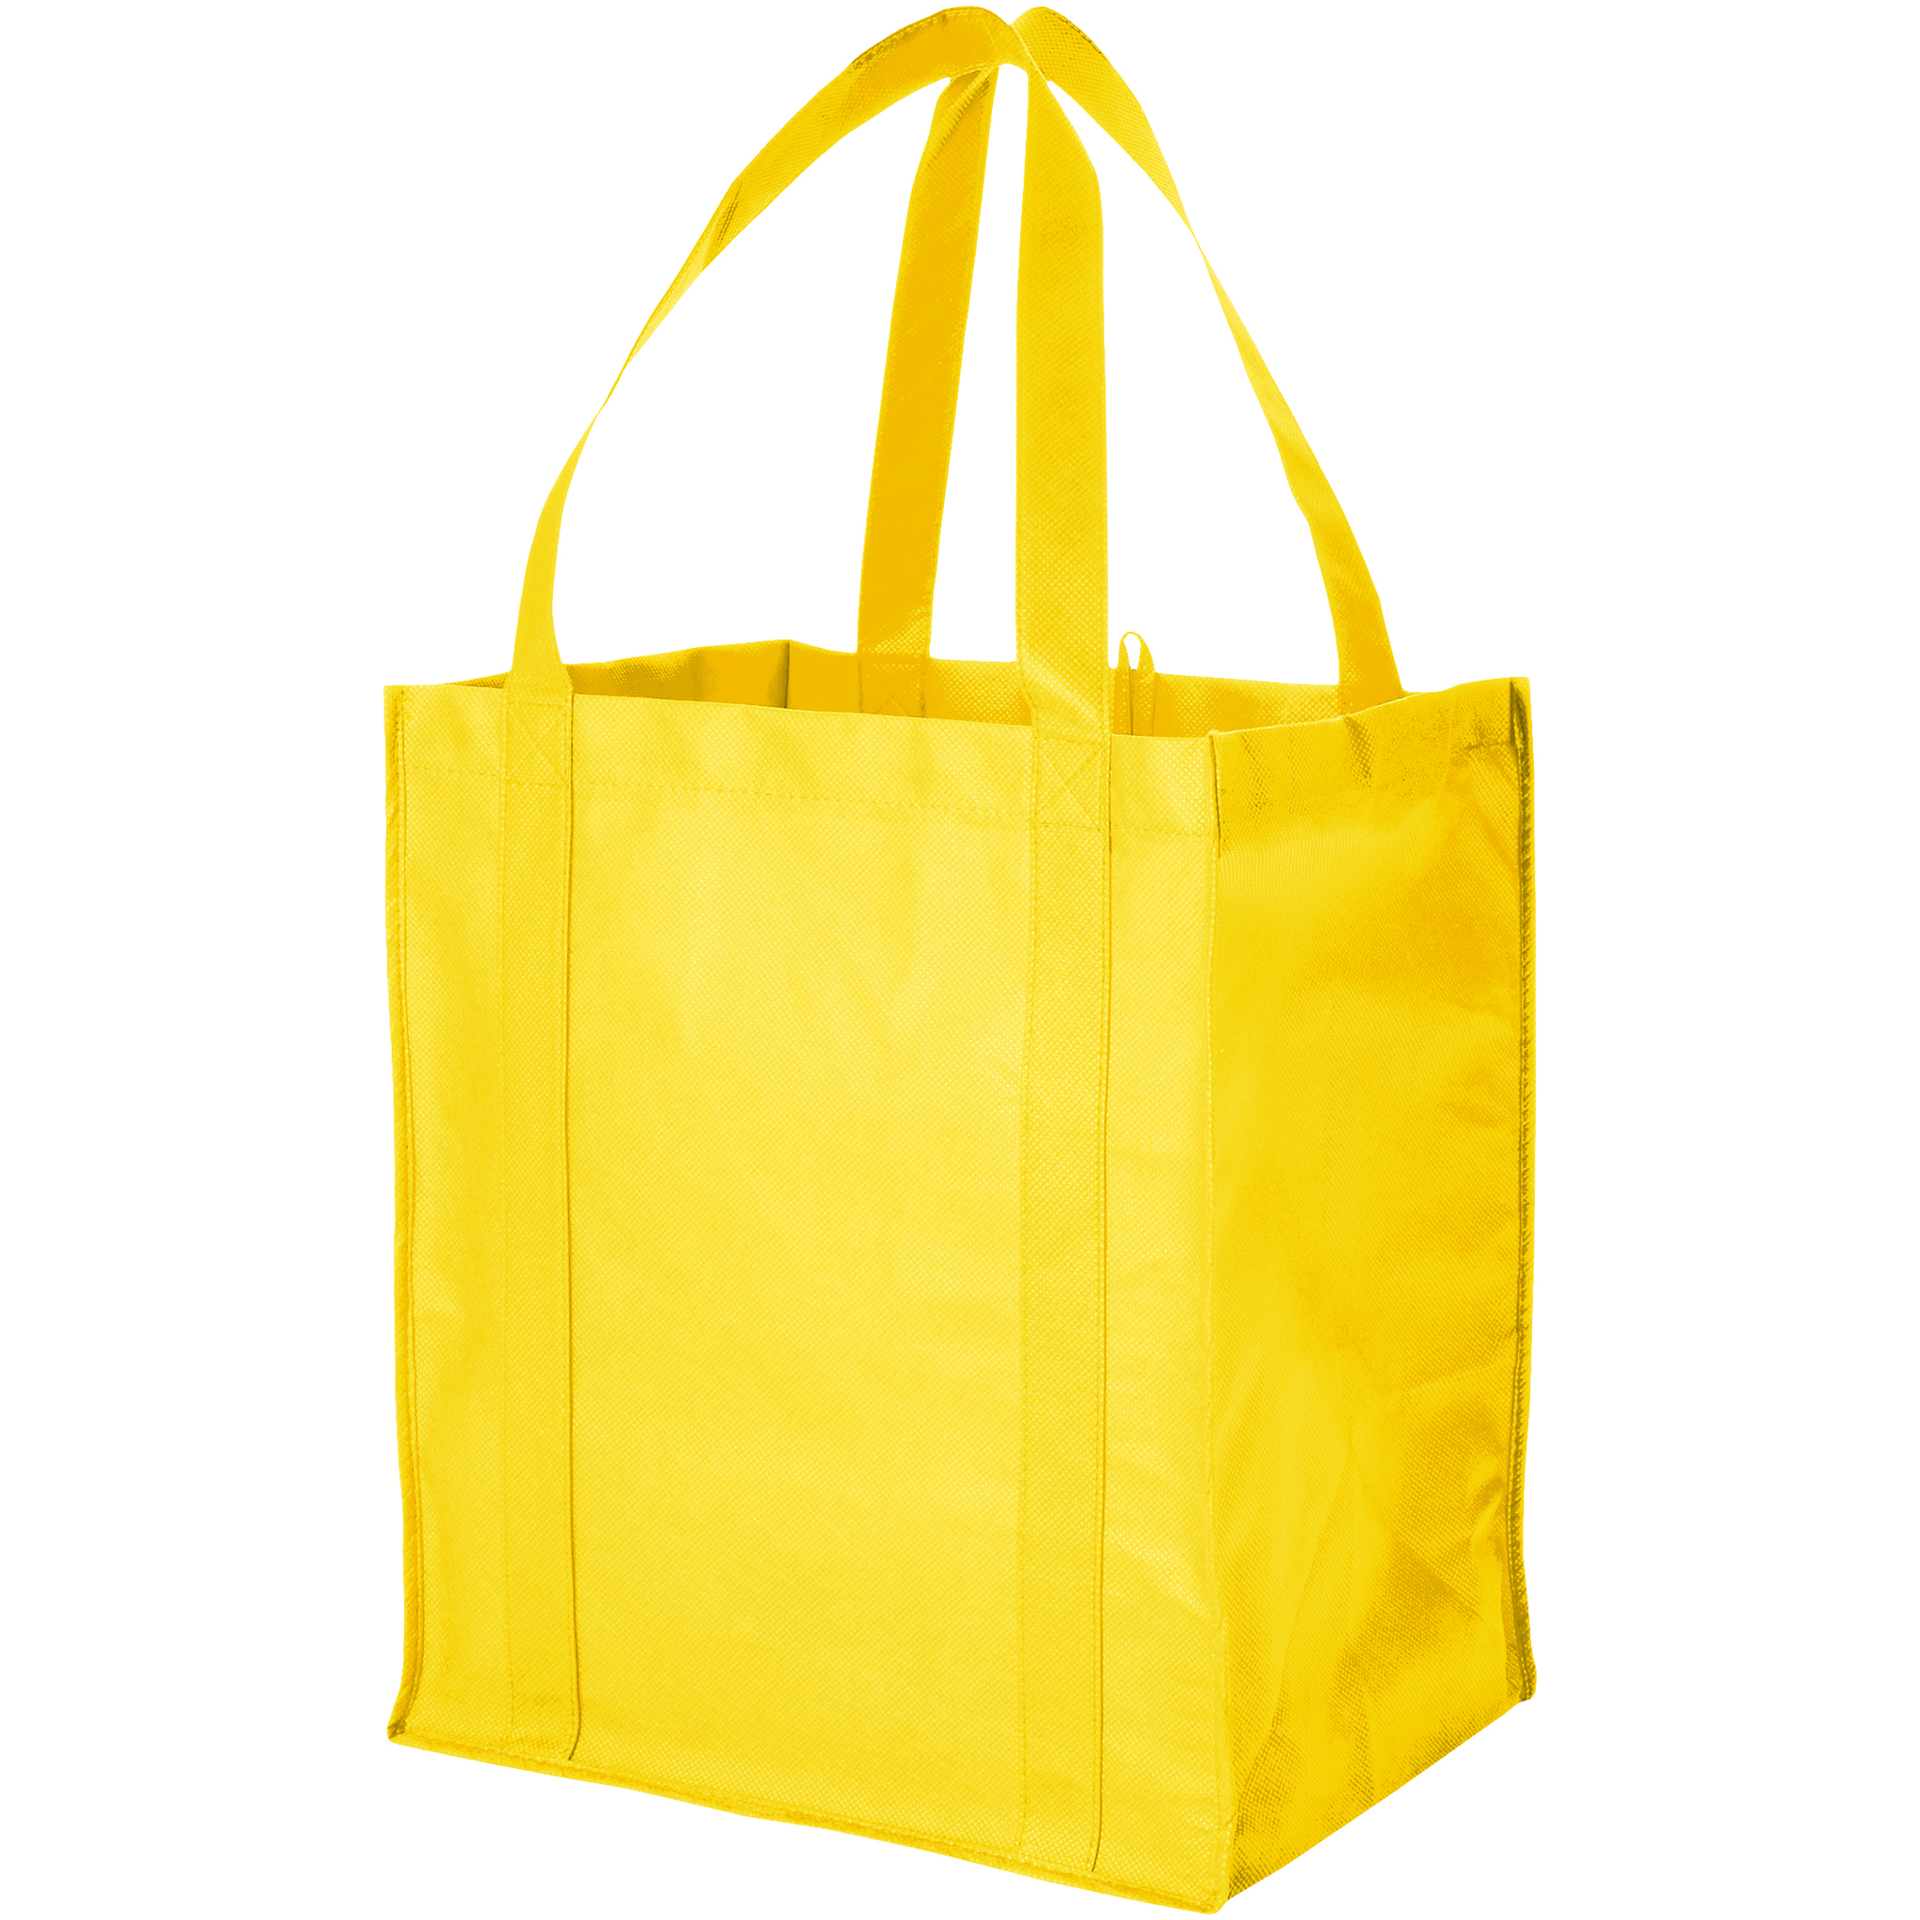 Large capacity reusable grocery bag in yellow with matching handles